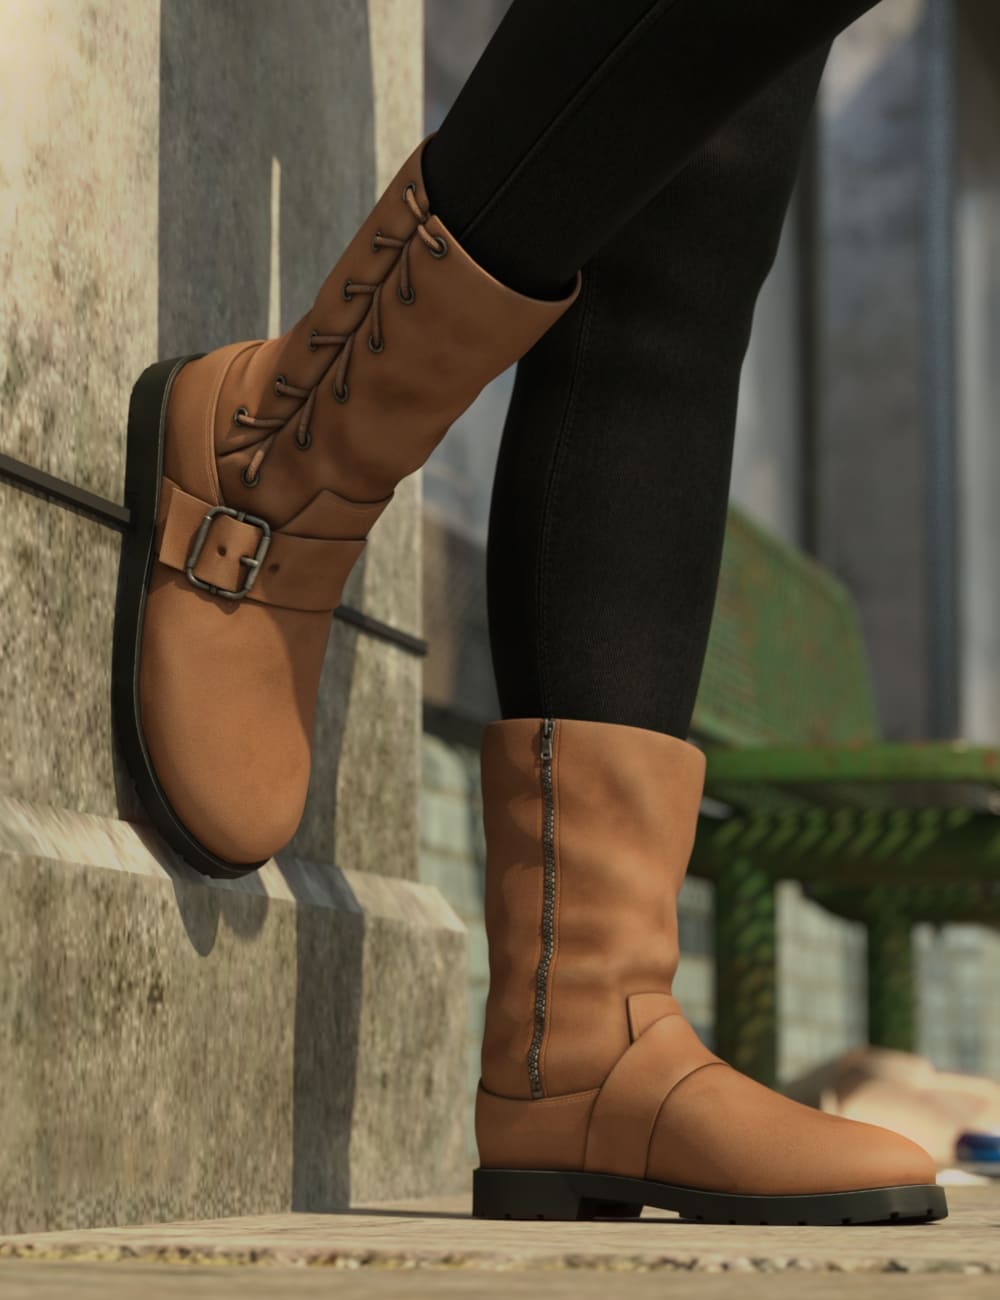 Side Laced Boots for Genesis 8 Female_DAZ3D下载站